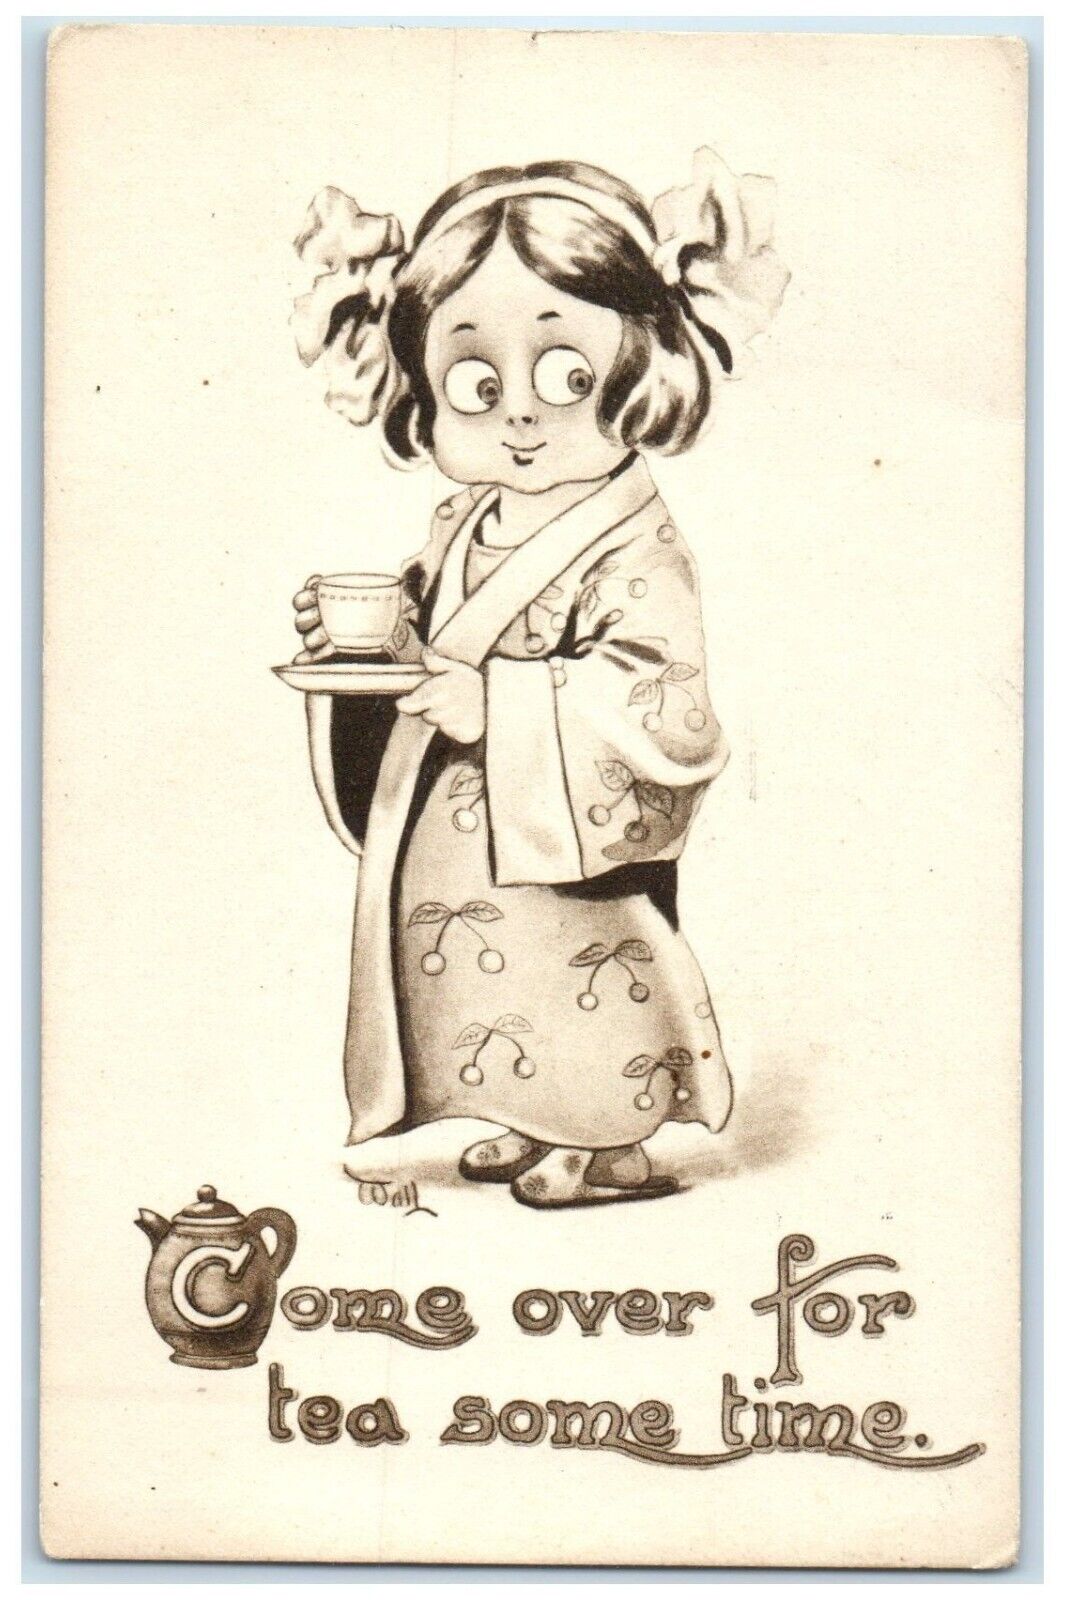 1912 Pretty Girl Come Over For Tea Some Time Wall Signed Portland OR Postcard